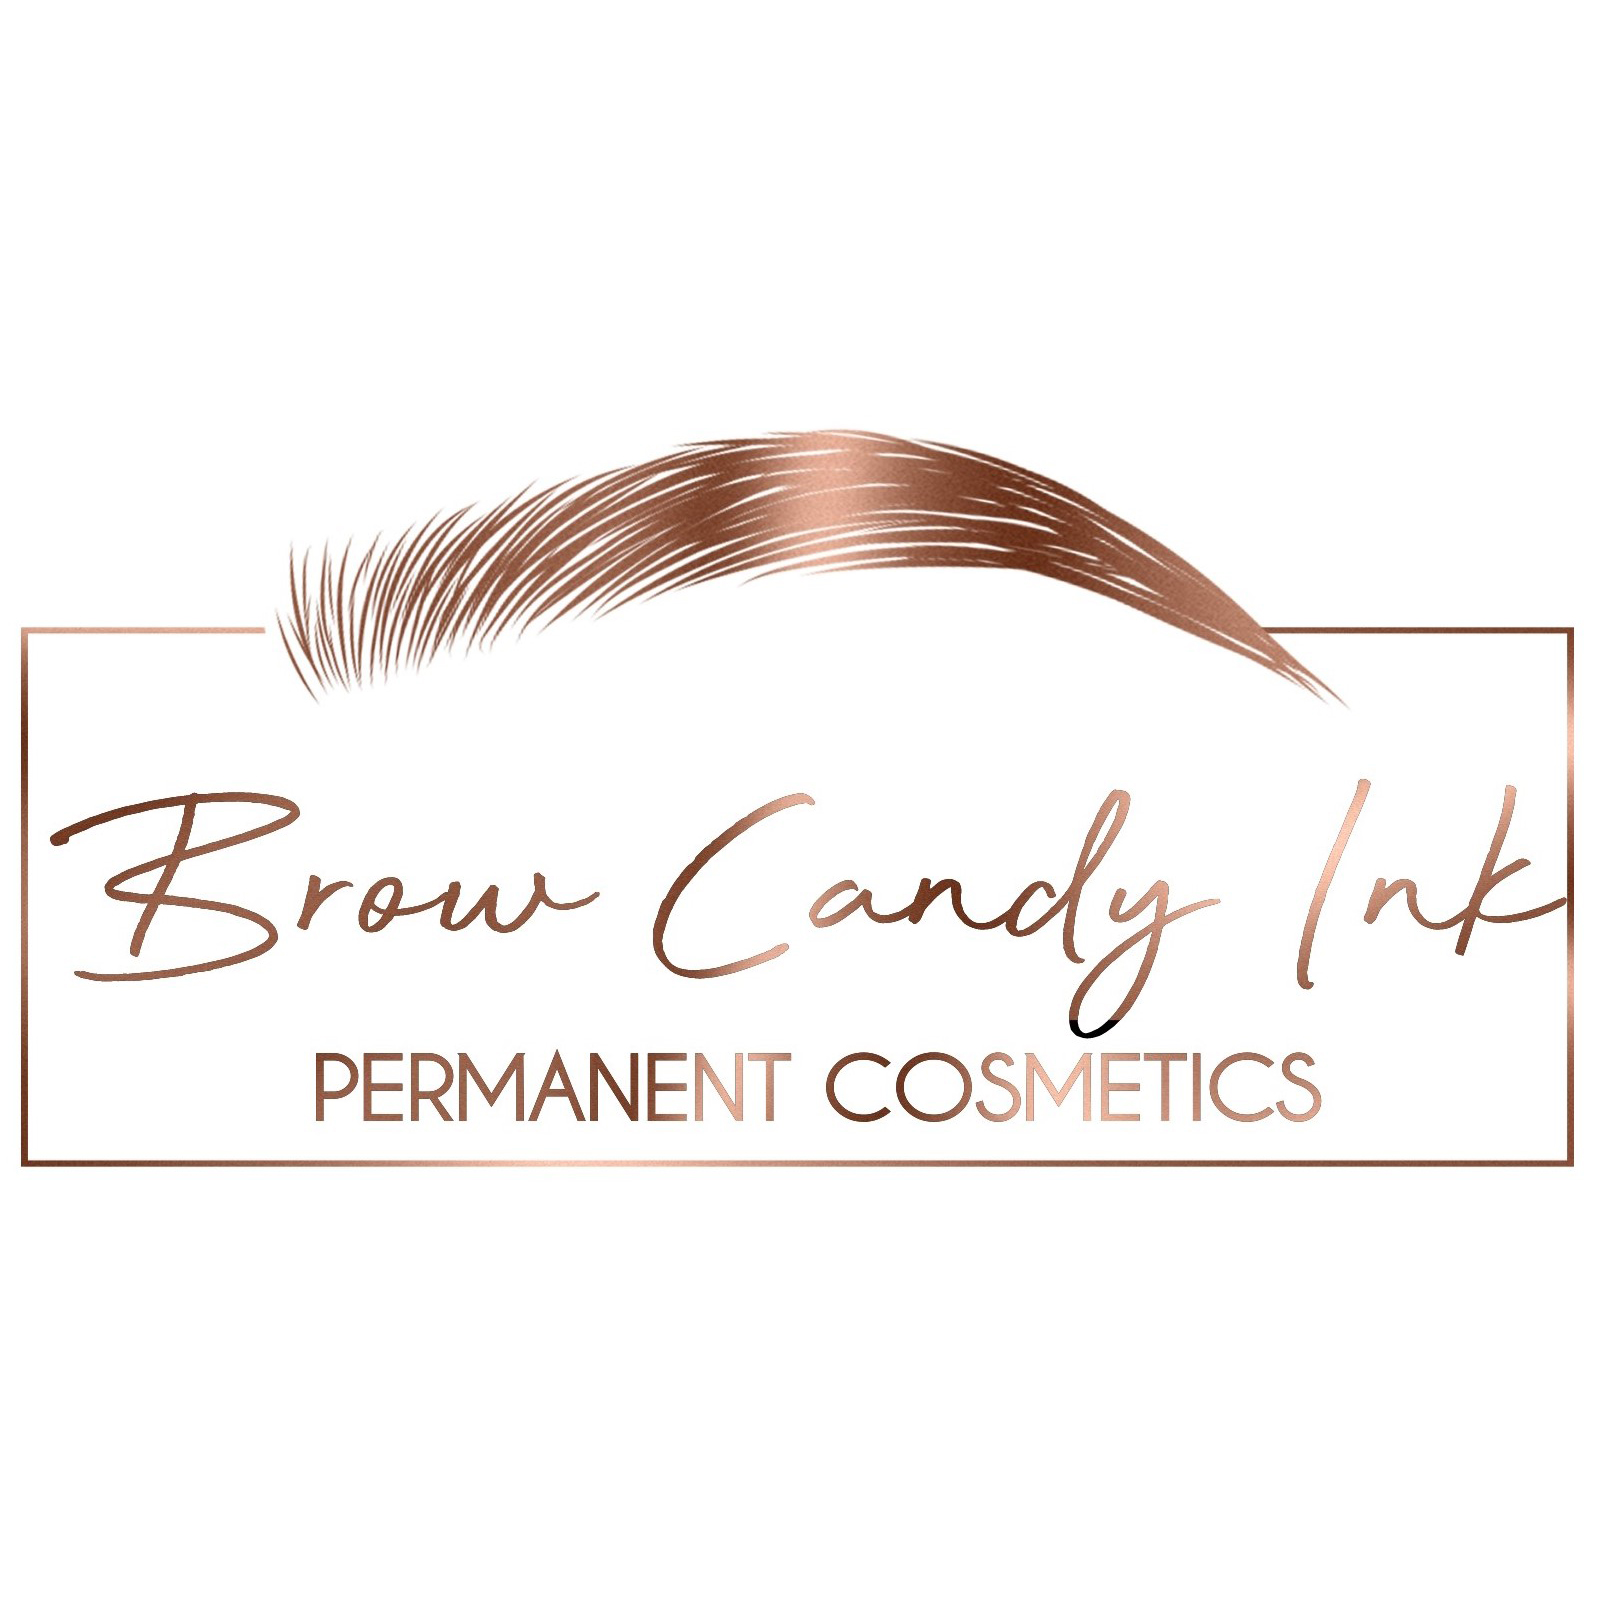 Brow Candy Ink